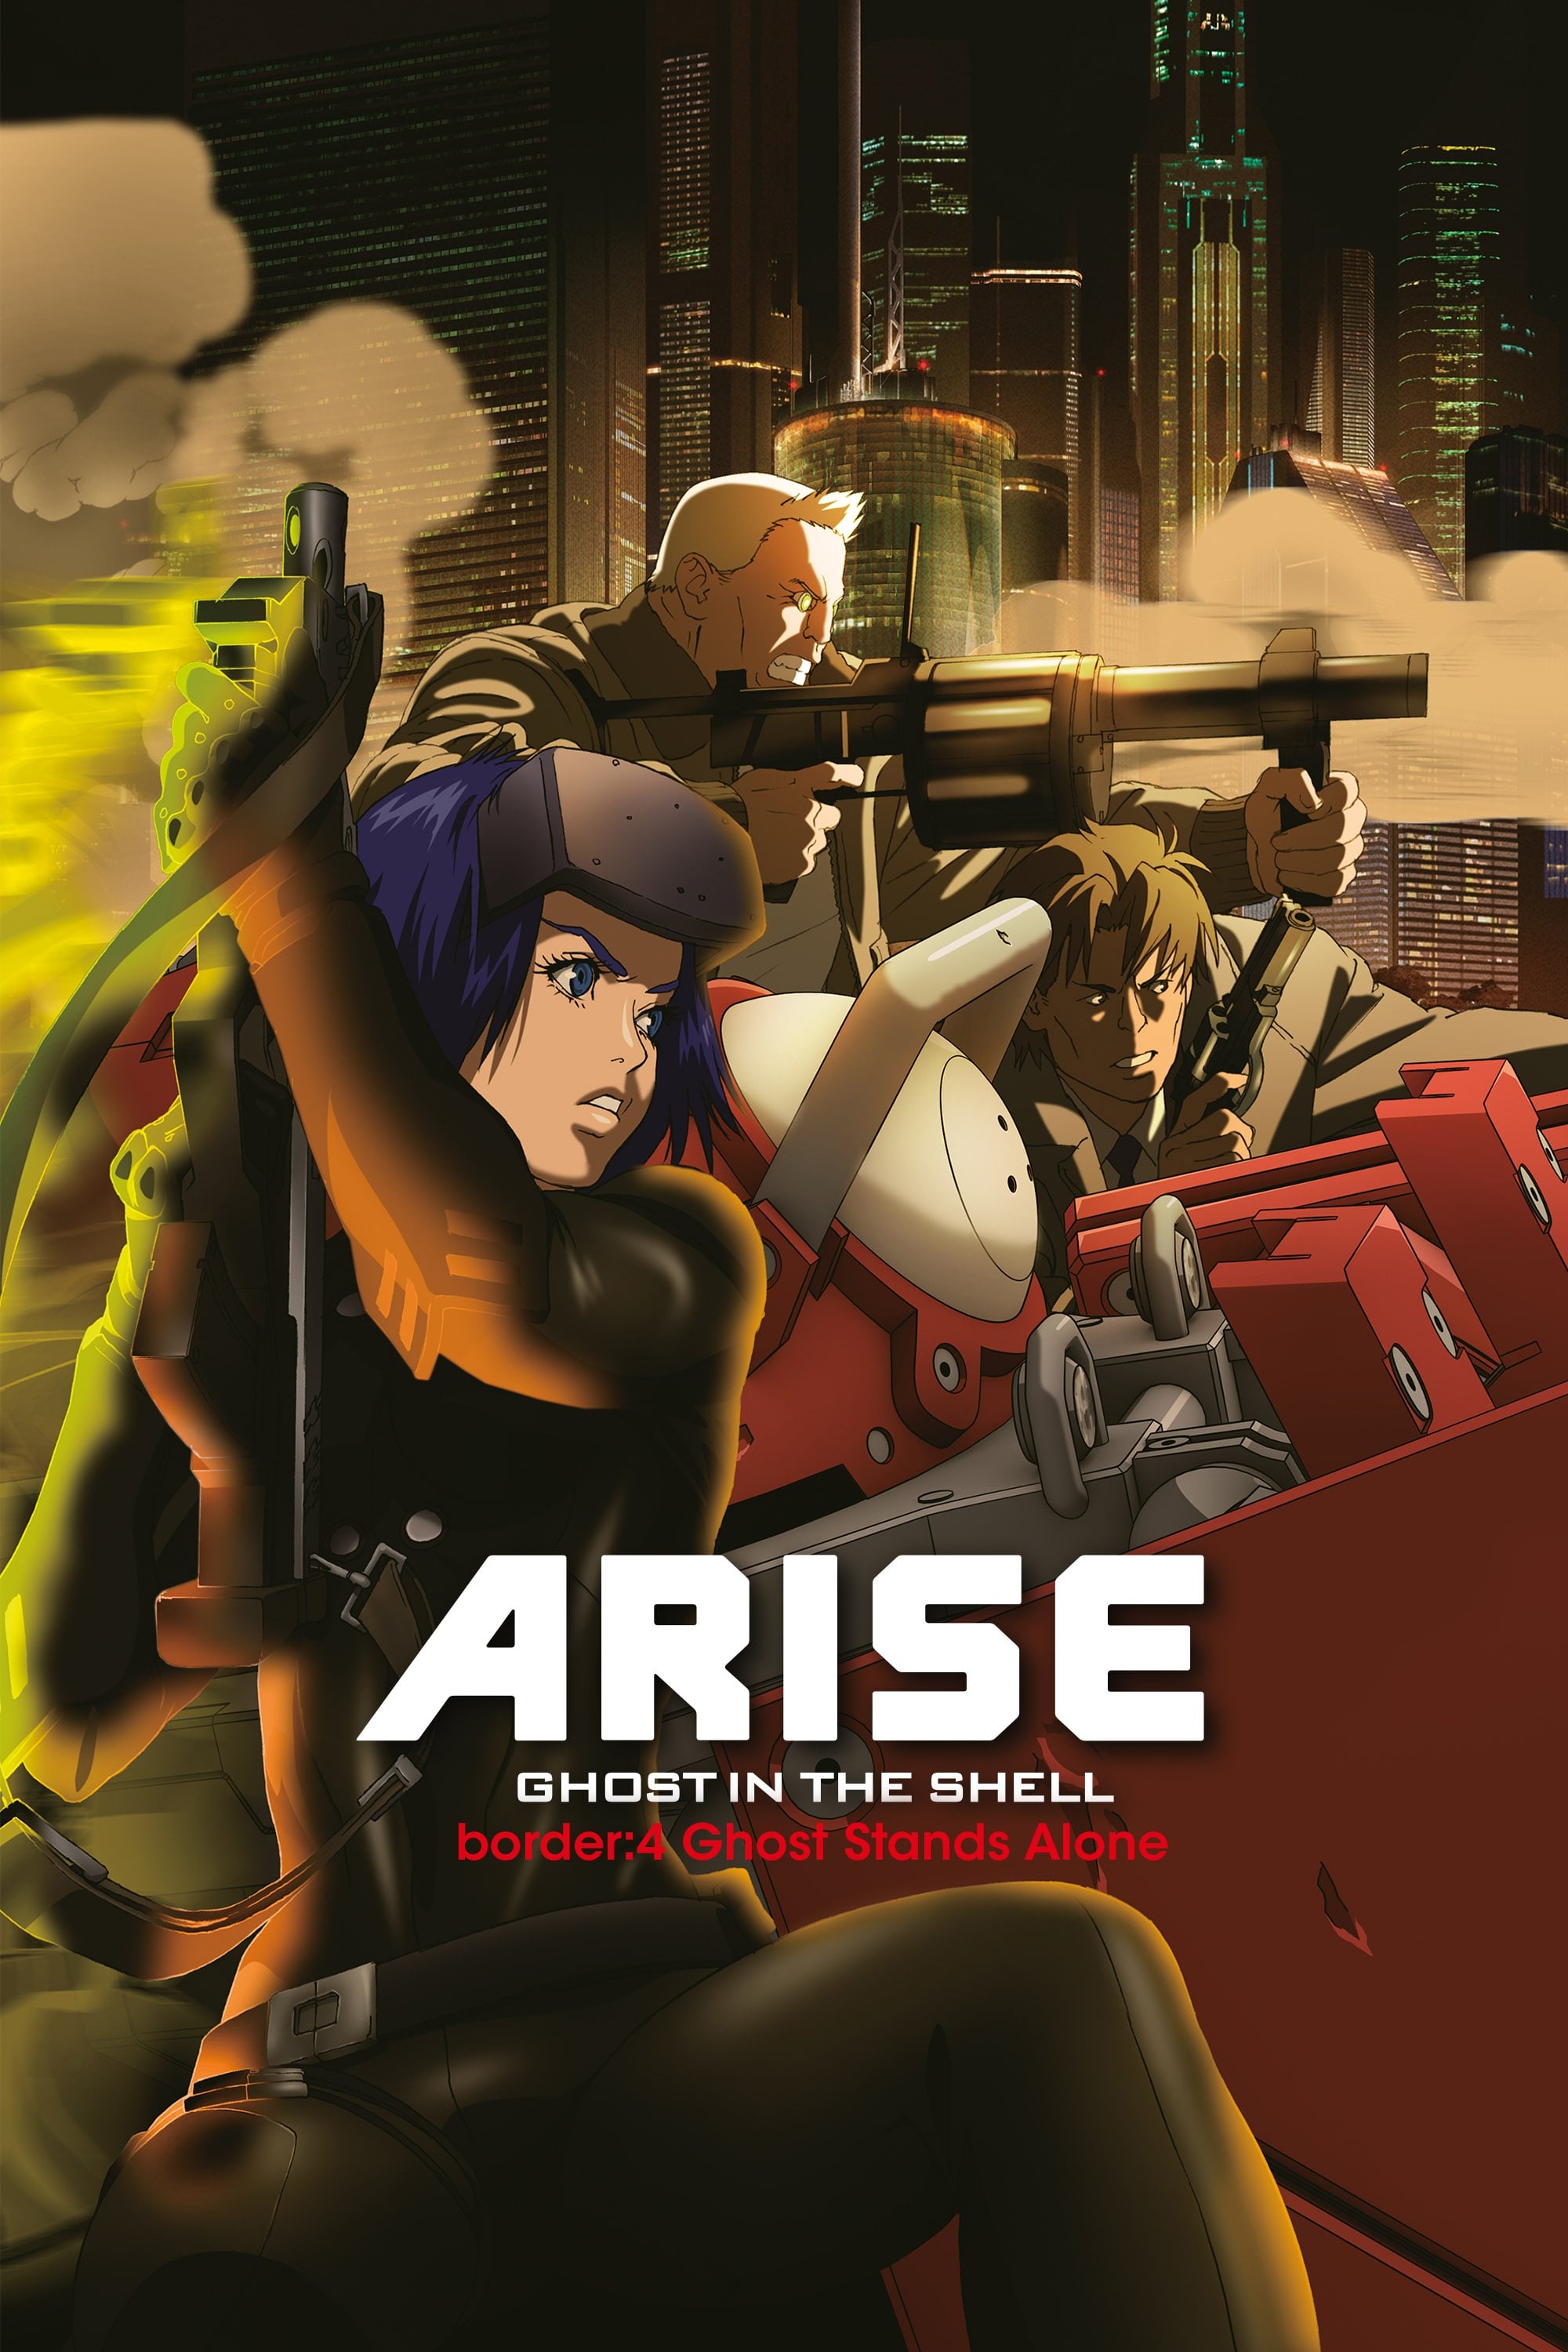 Ghost in the Shell Arise - Border 4: Ghost Stands Alone (2014)